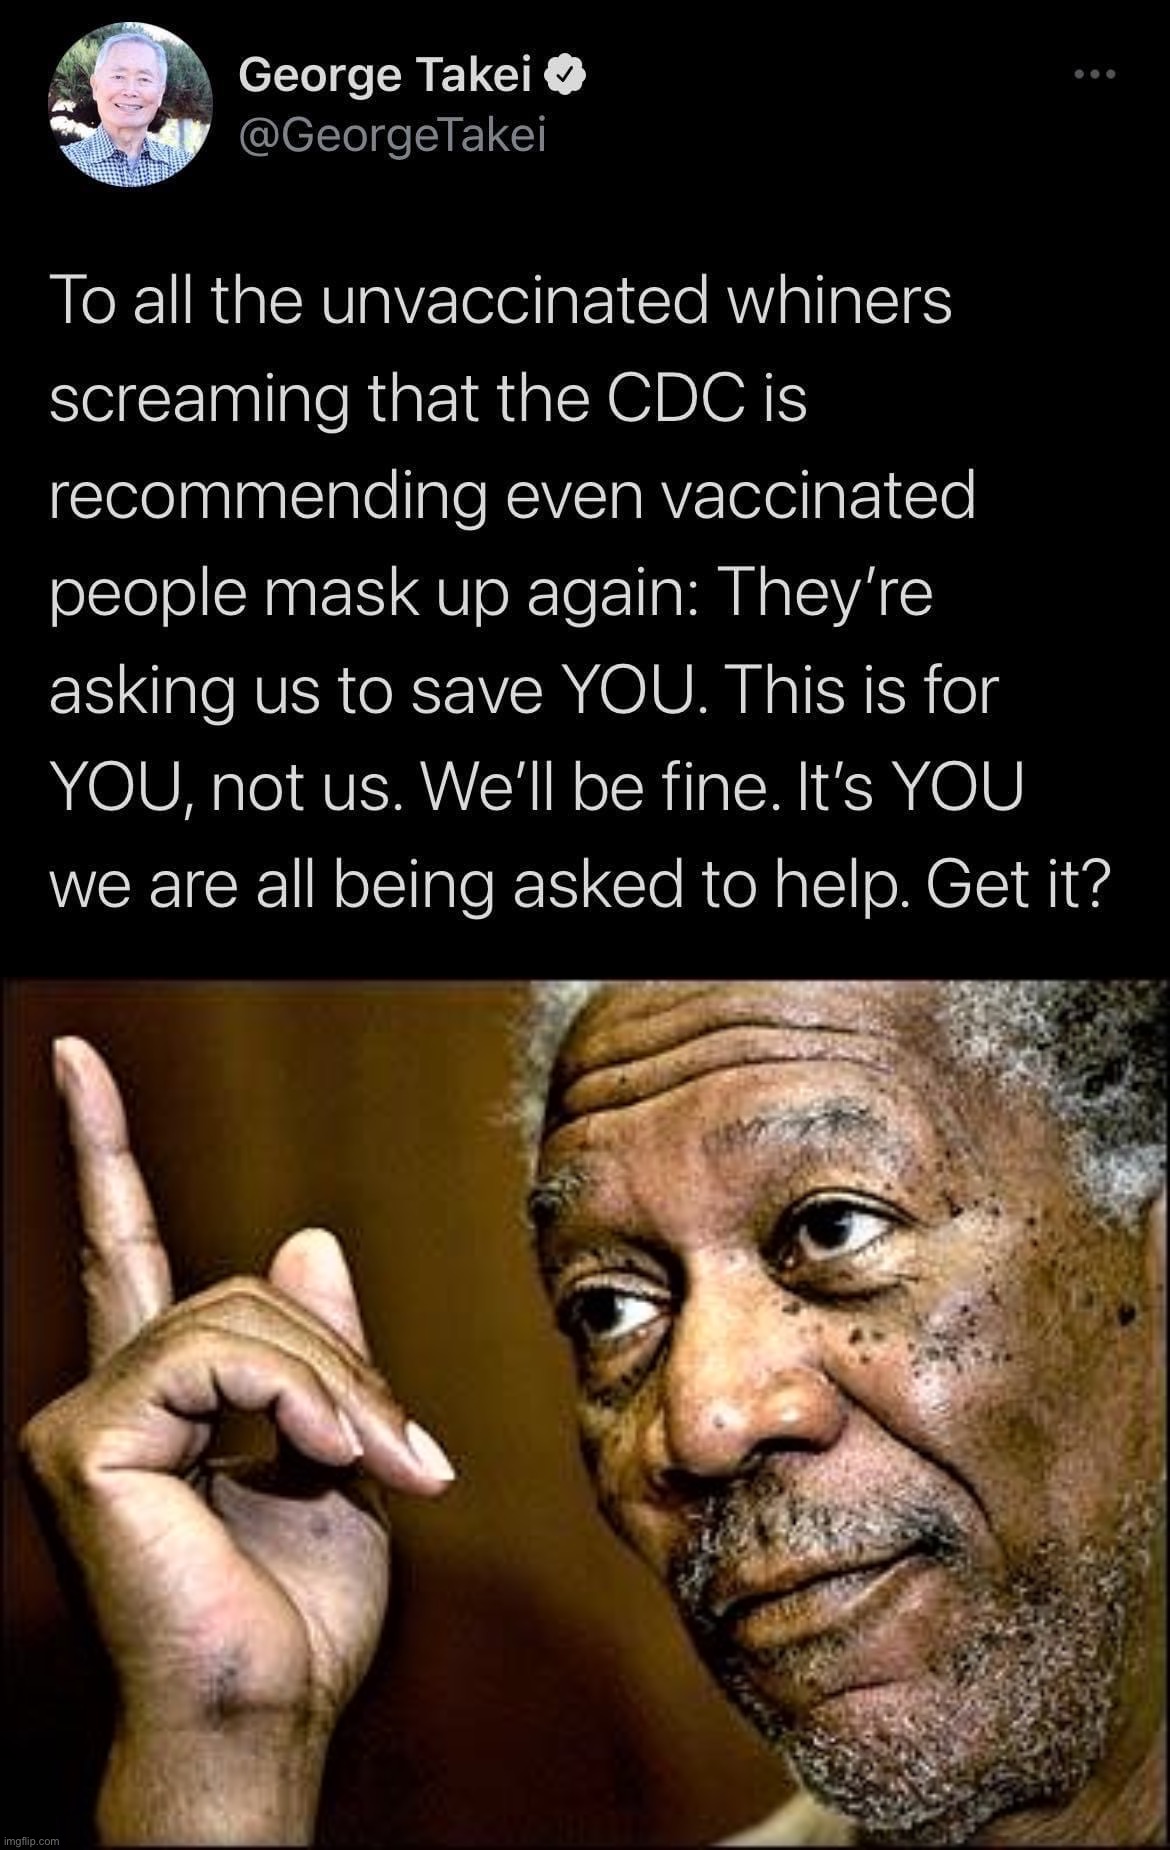 [Chances any of them will get it?] | image tagged in george takei antivaxxers,morgan freeman this hq | made w/ Imgflip meme maker